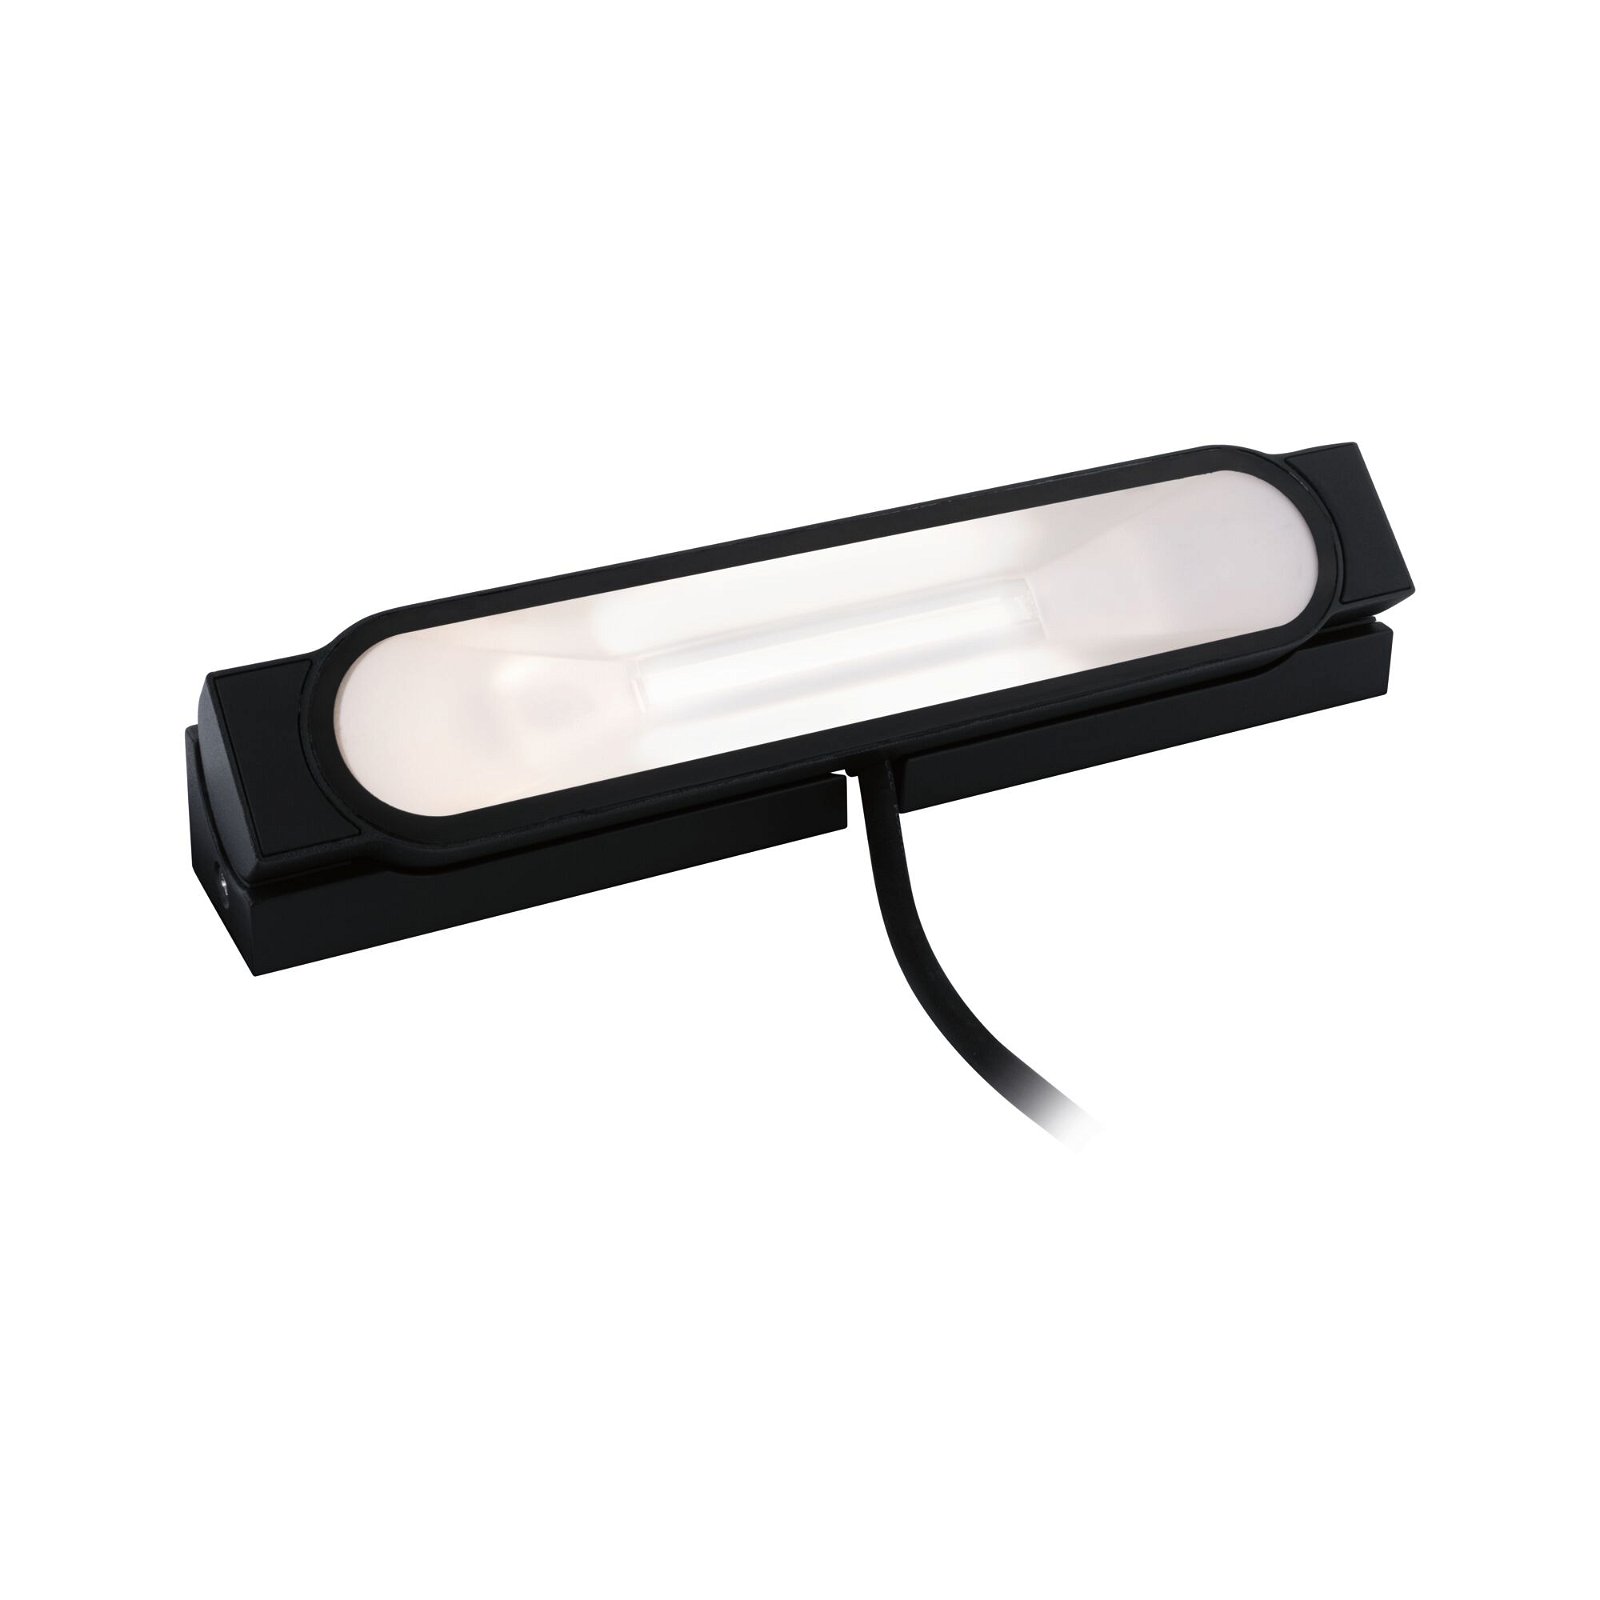 LED wallwasher Ito IP67 252x49mm 3000K 6W 200lm 230V 70° Antraciet Metaal